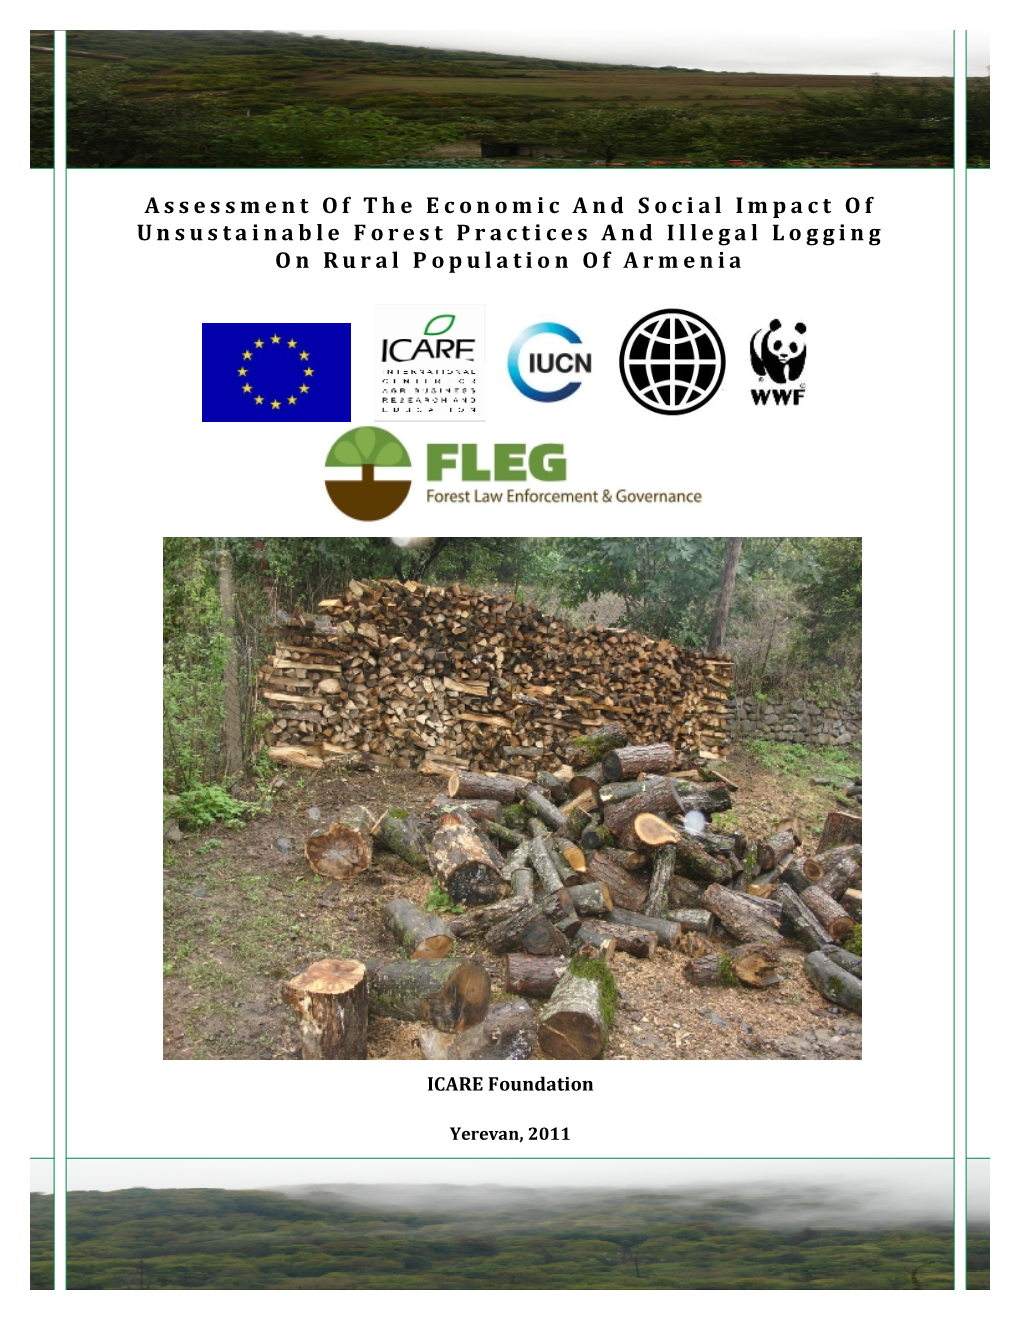 Illegal Logging and Unsustainable Forest Practices Continue Threatening the Environment